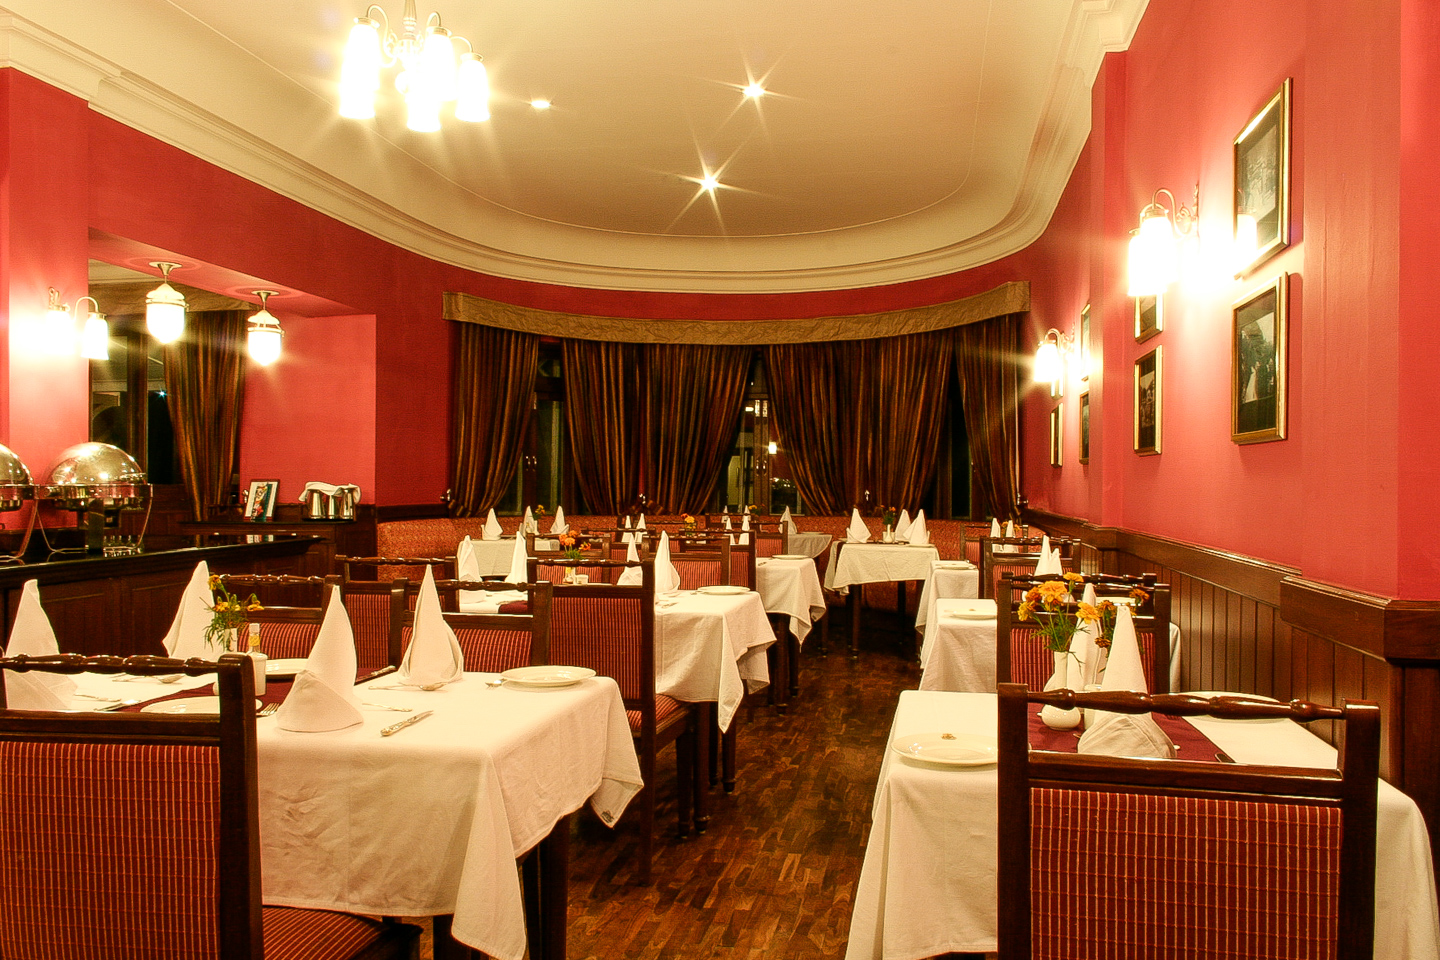 The dining room has wood panelling and deep red walls. The floor is parquet with period tiles.